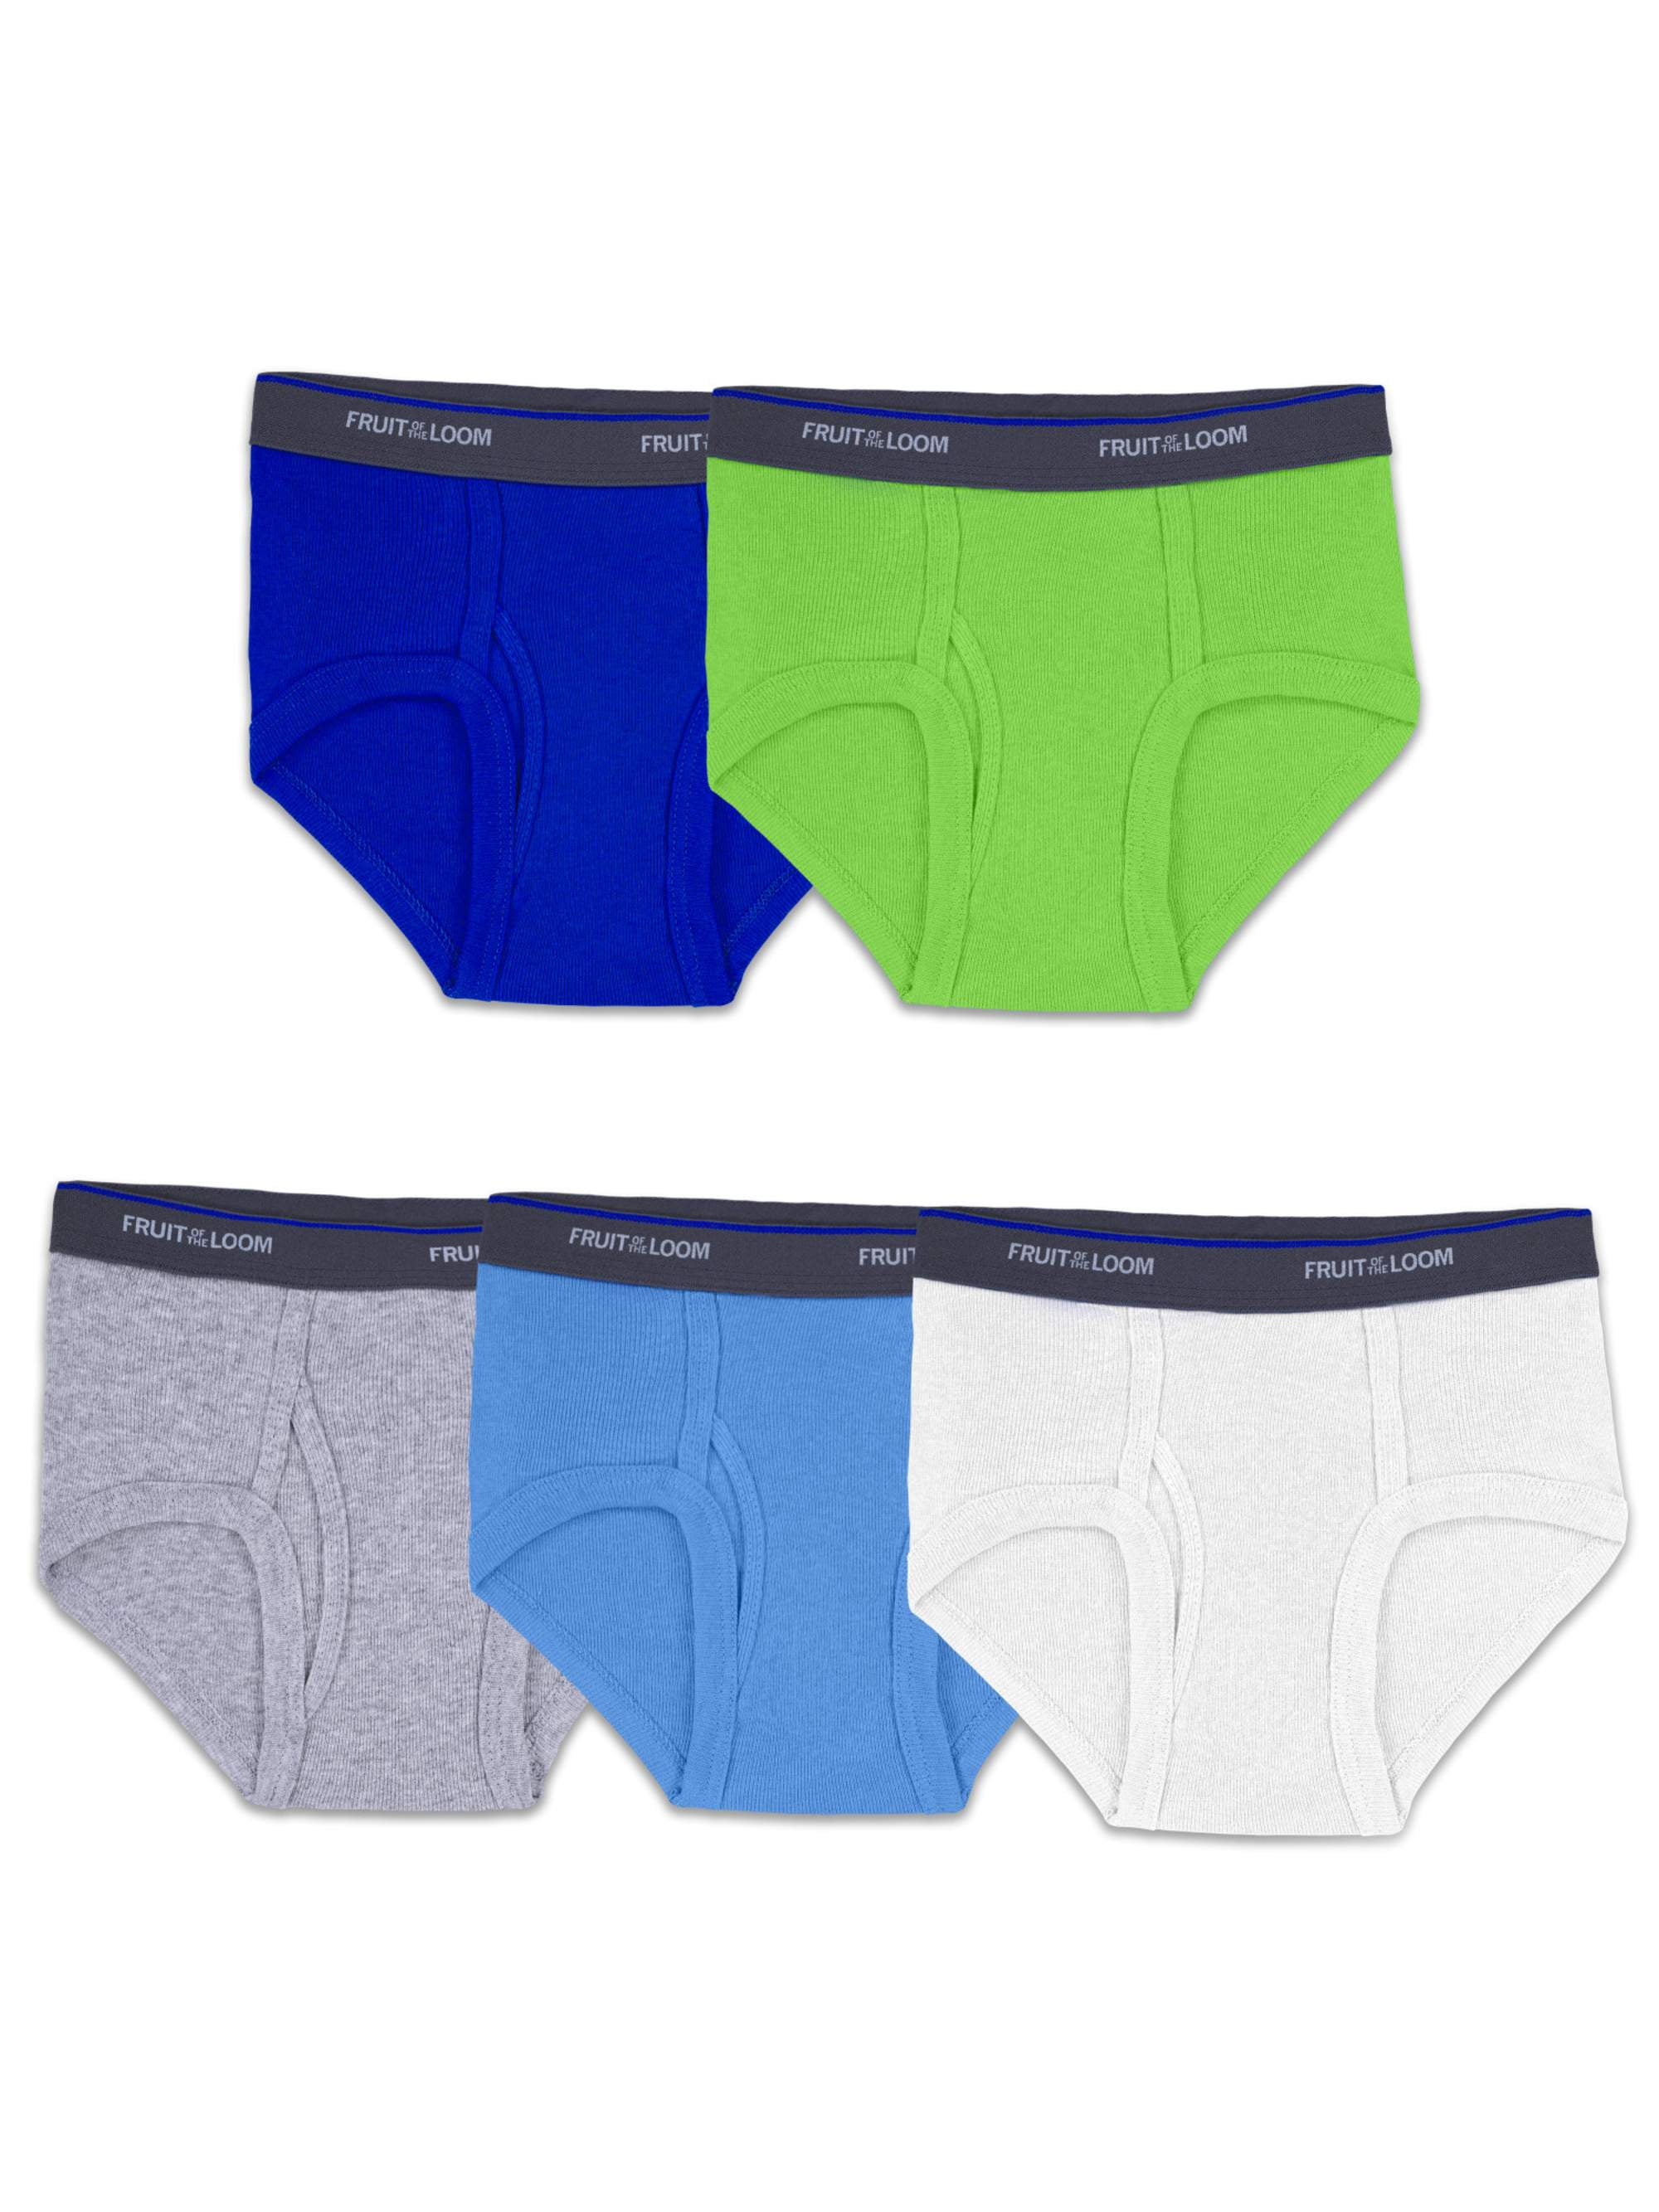 Fruit of the Loom Boys Fashion Brief Pack of 5